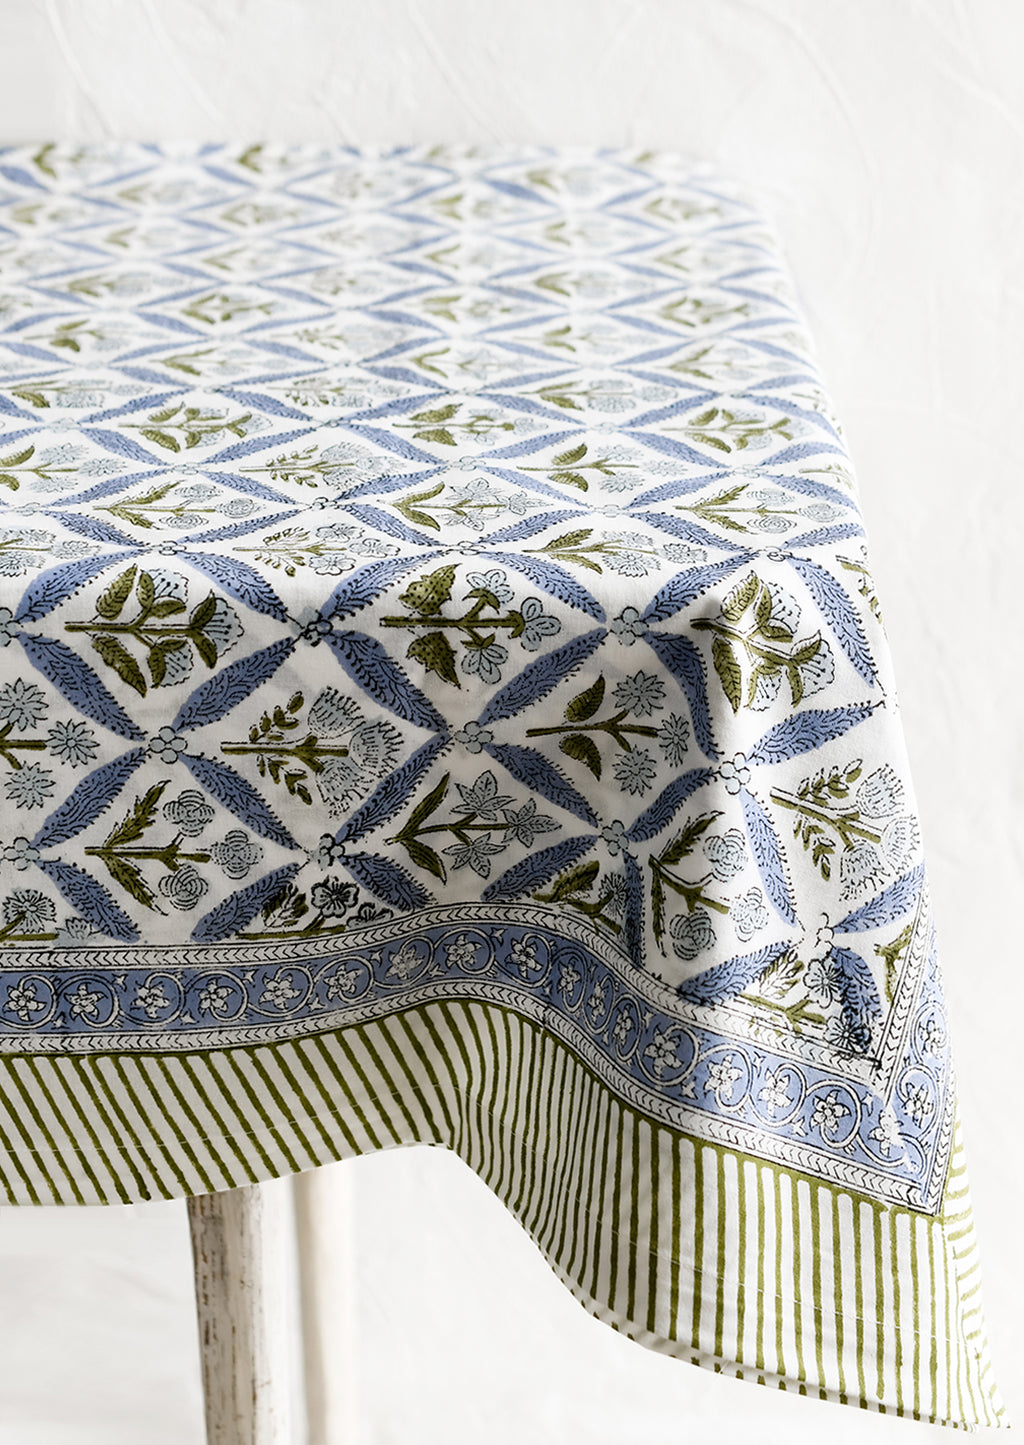 2: A block printed floral tablecloth in blue and green.